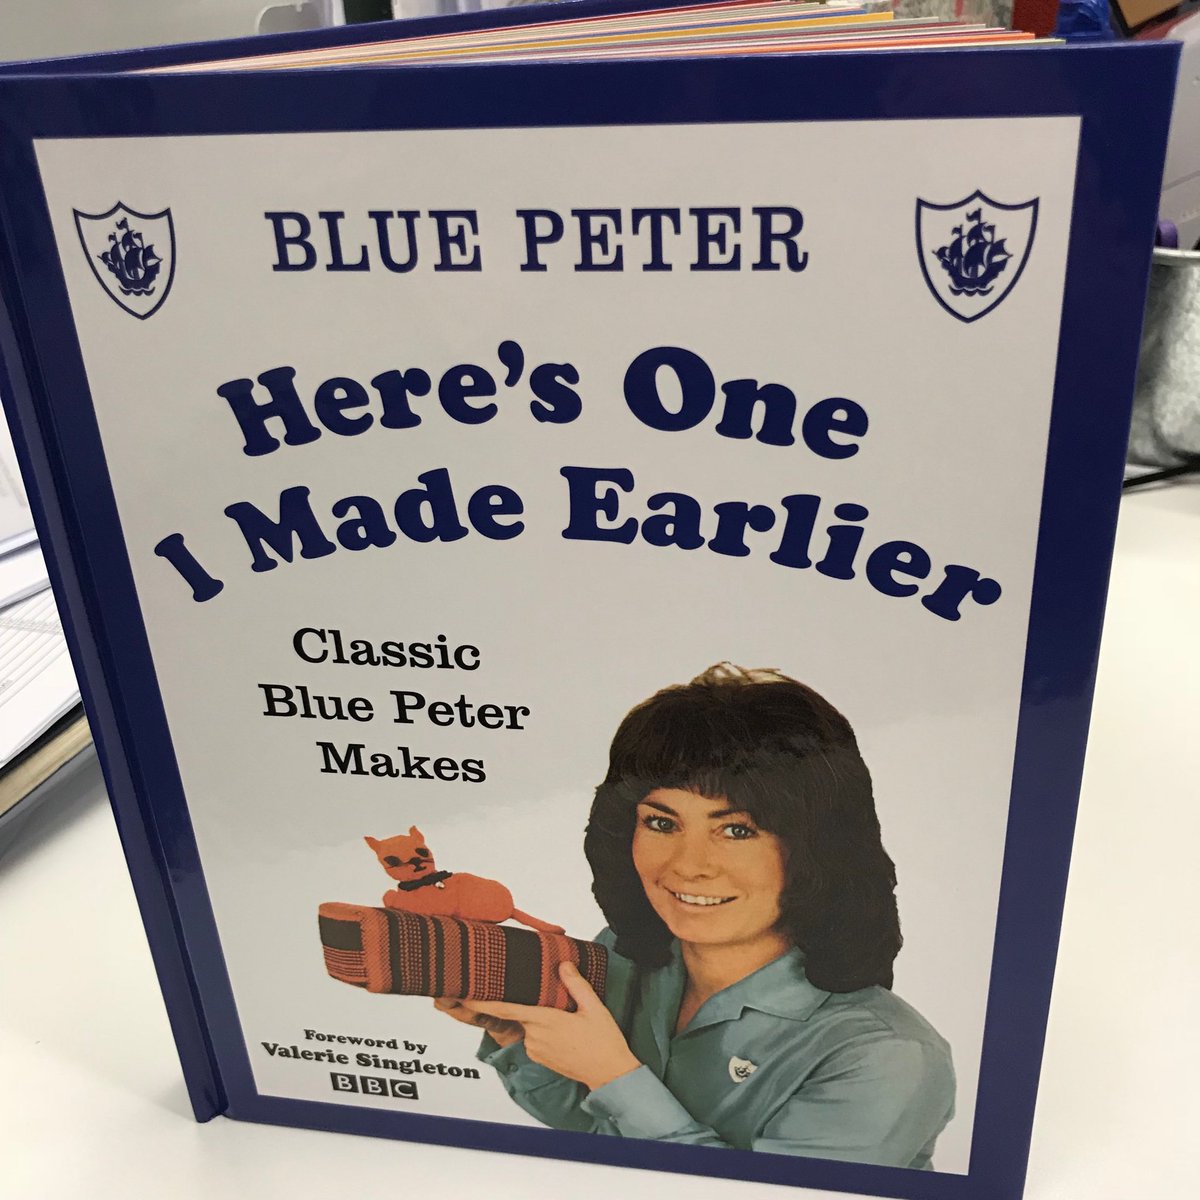 It’s here. The advance copy. All the best #bluepeter makes in their original form in one book. #heresoneimadeearlier. Look out your sticky-backed plastic.